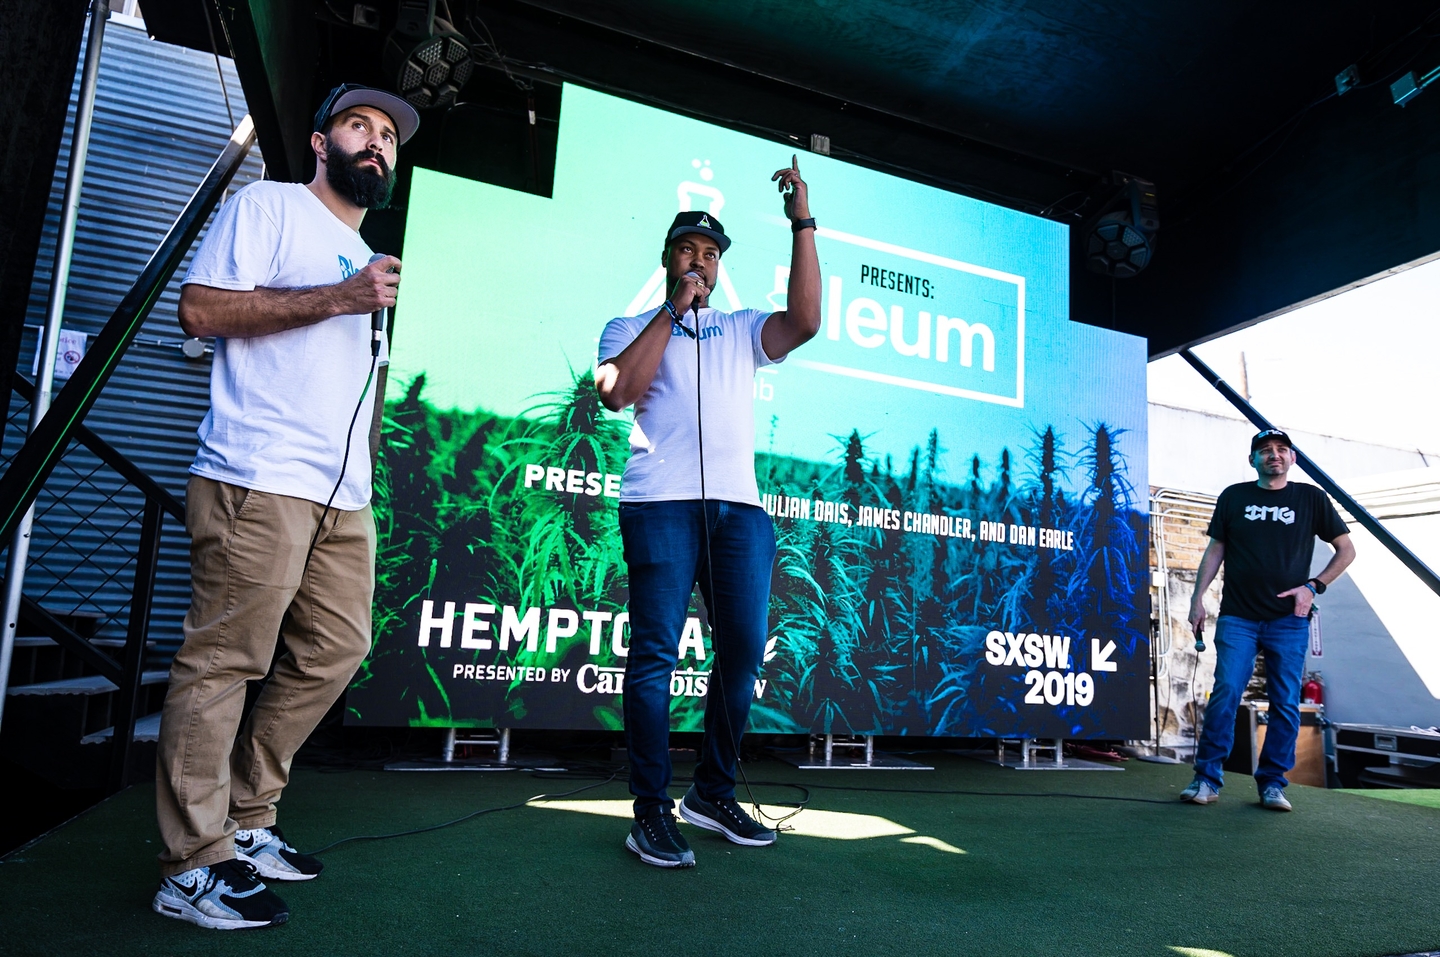 The Hemp Today activation featured panel discussions with professional athletes & leading industry experts, film screenings, live music, product launches, and more. Photo by Ann Alva Wieding